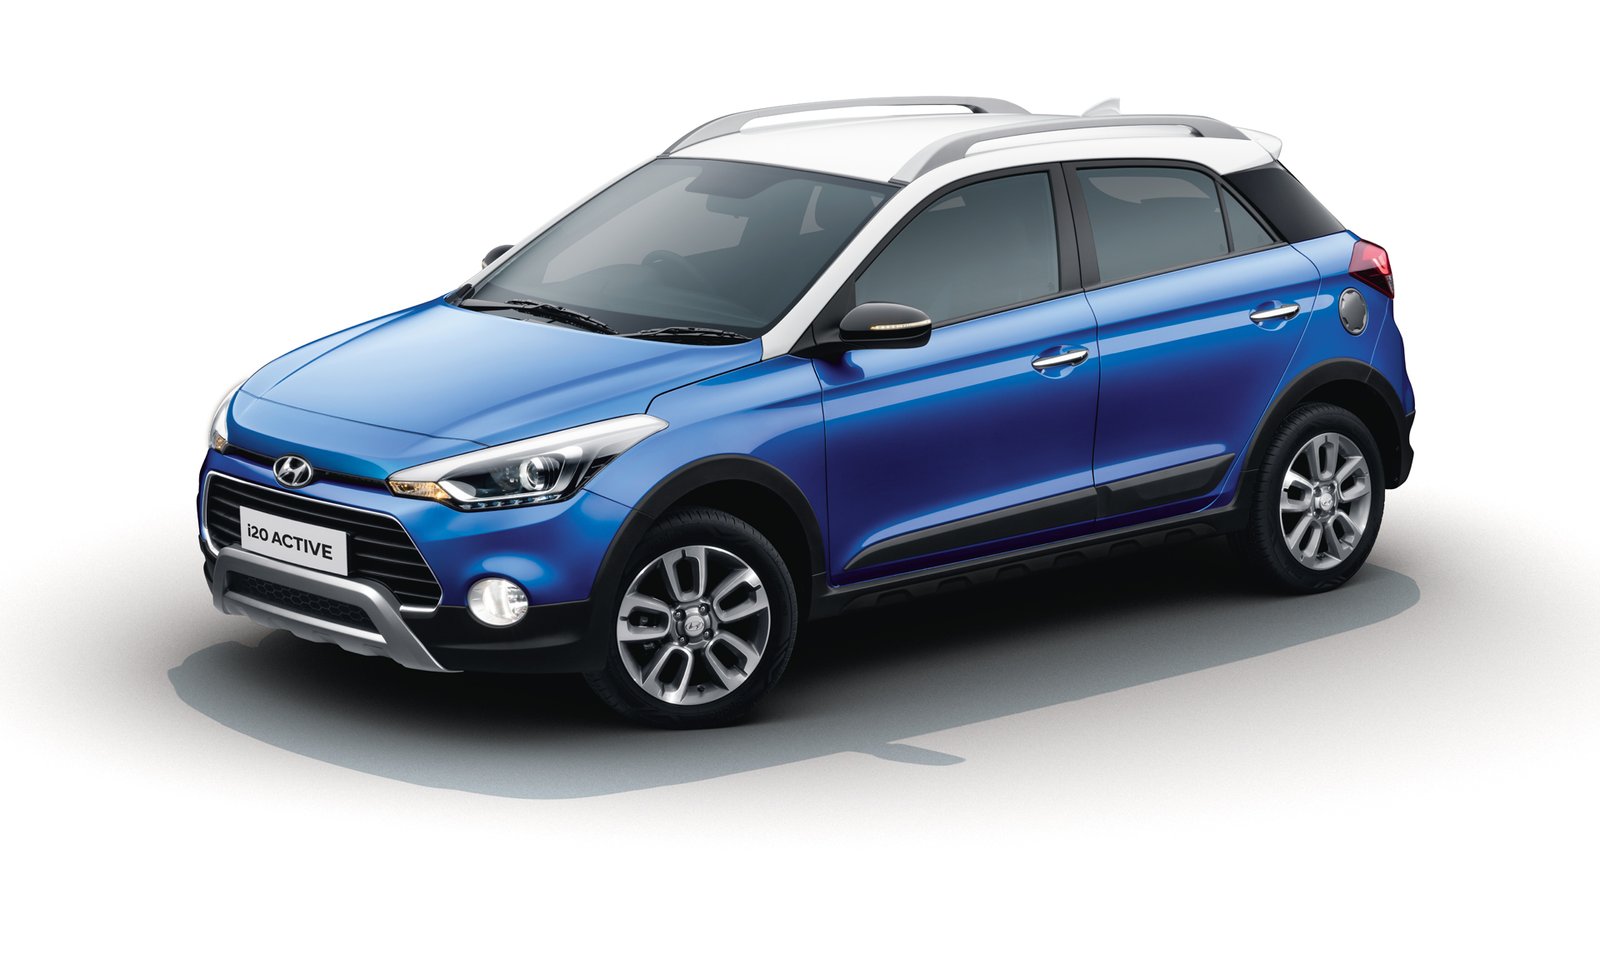 Hyundai i20 Active Facelift-All Variants Explained-Features,Price and Specs  - Team Car Delight